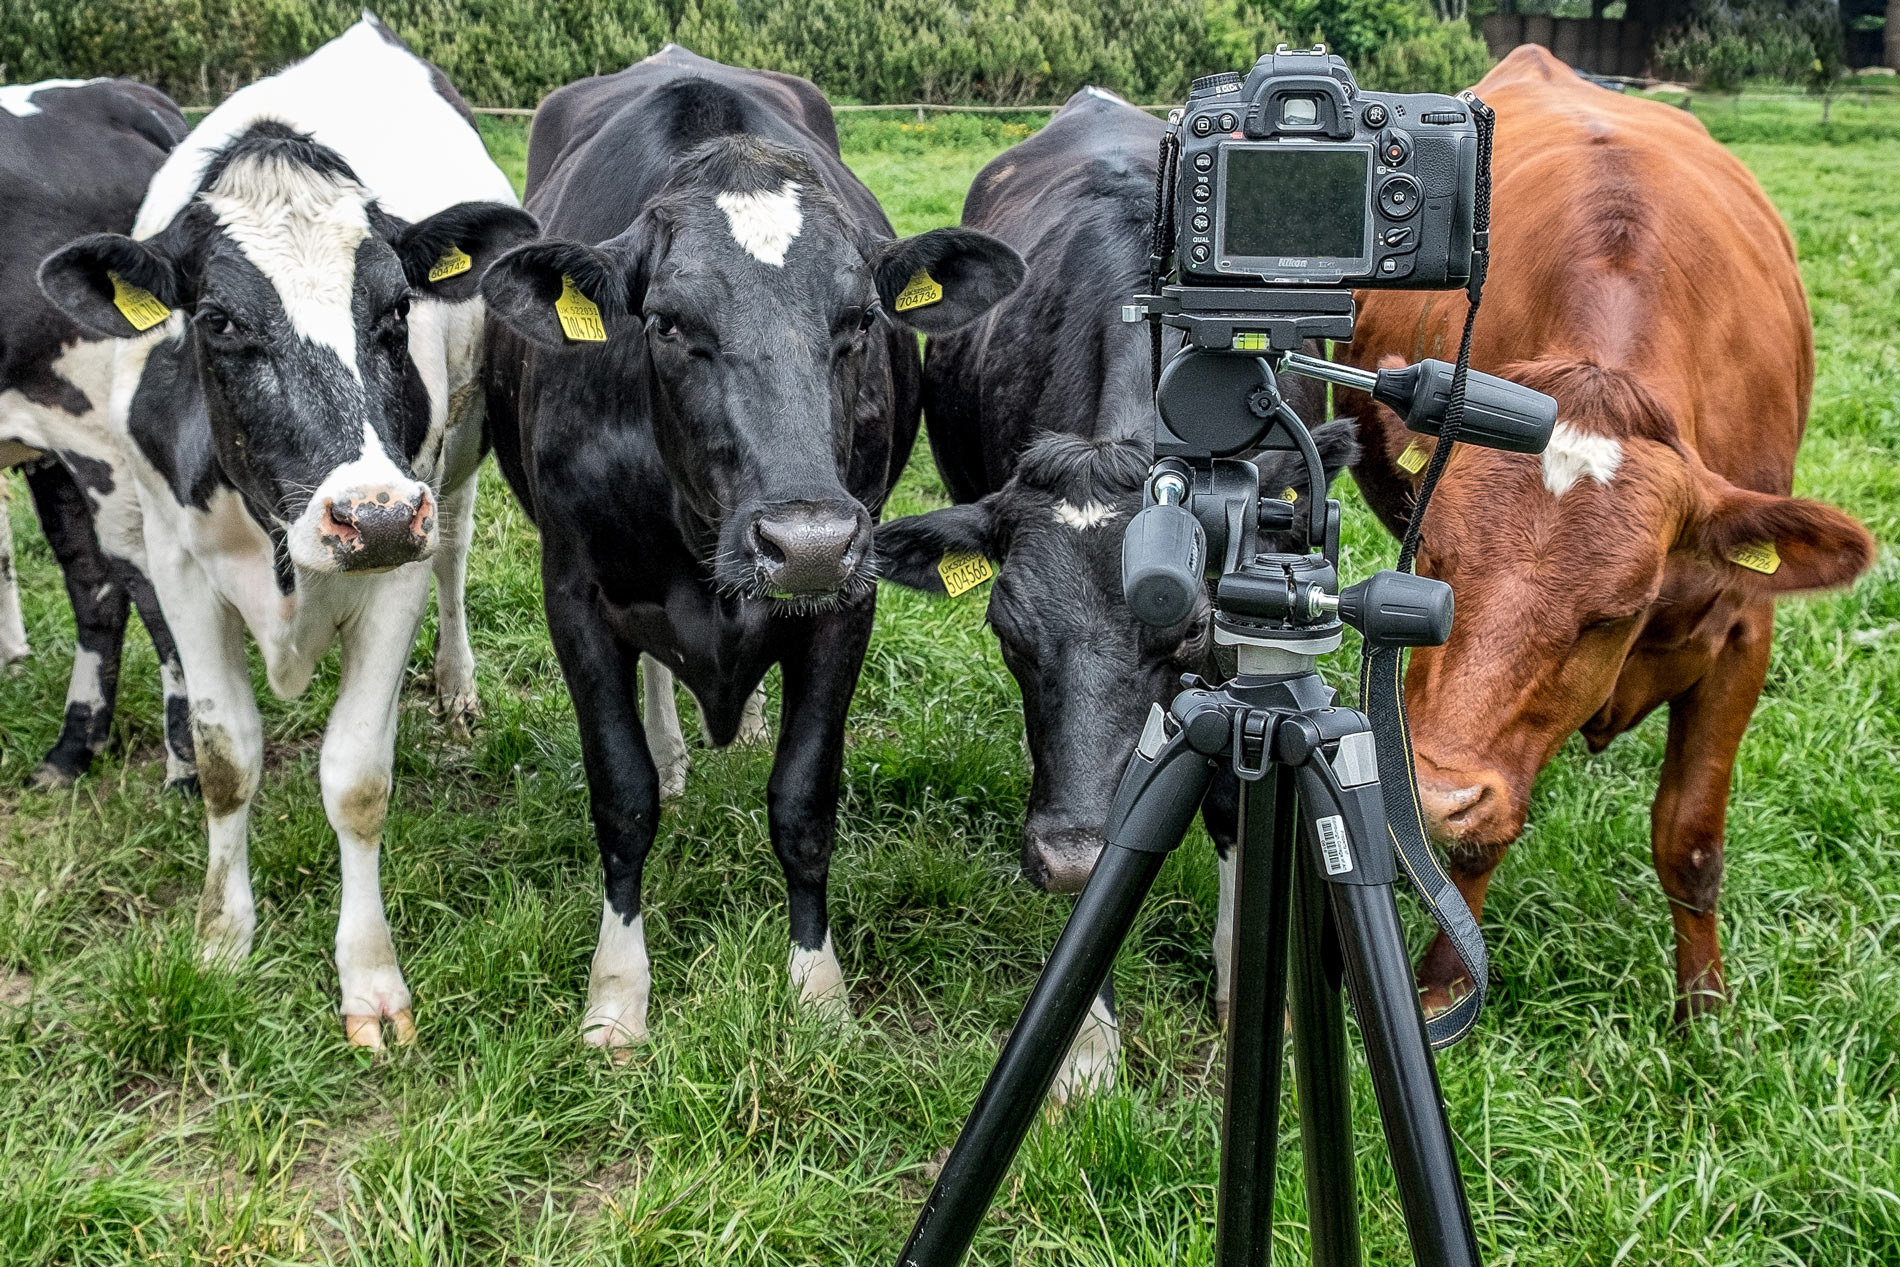 mackies-cows-with-camera-copyright-broad-daylight.jpg